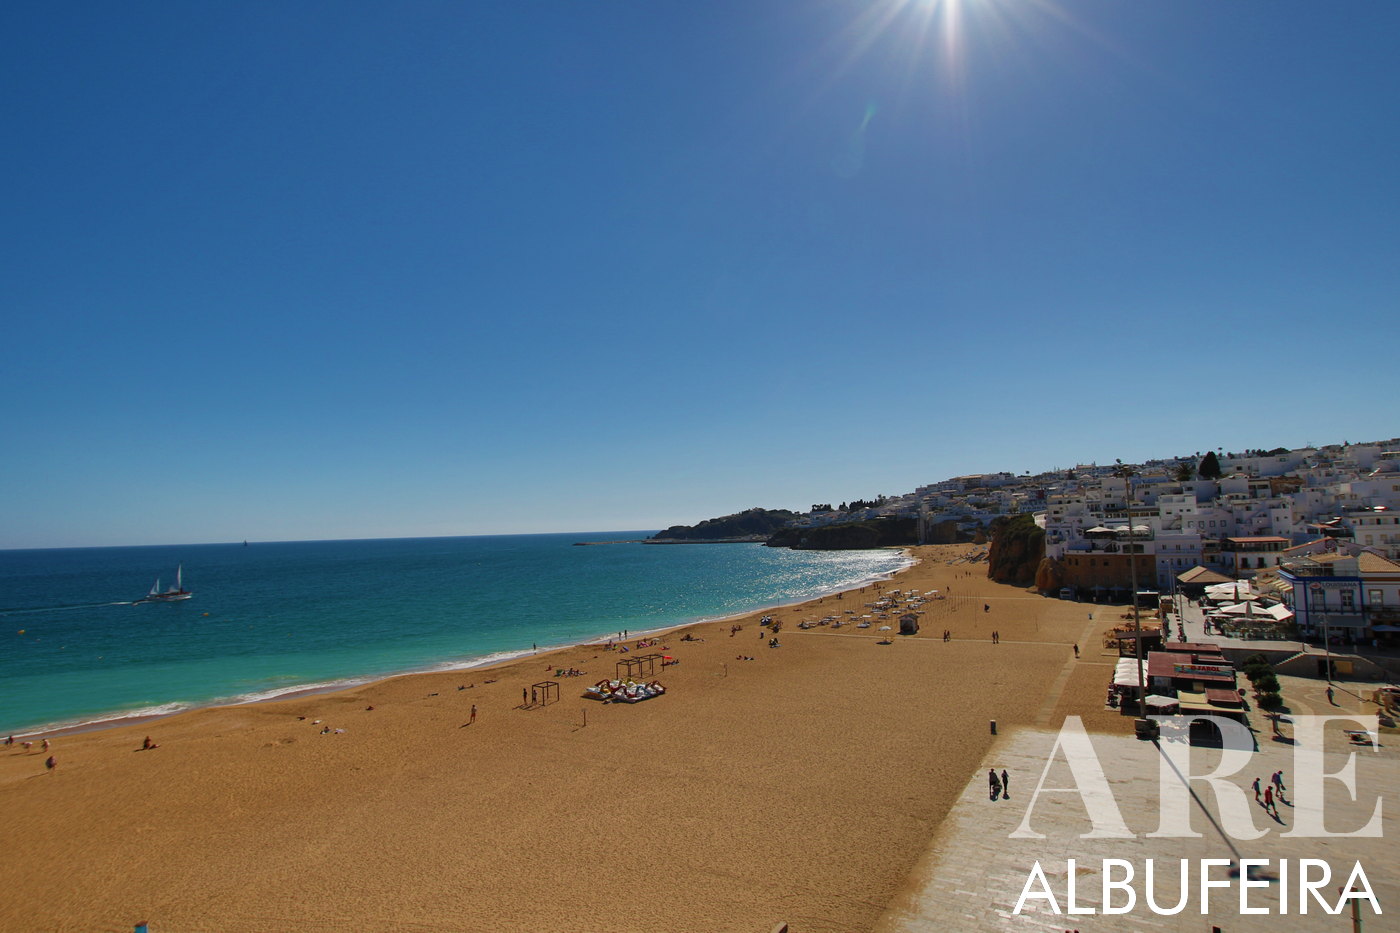 Spectacular viewpoint overlooking Albufeira's Fisherman's Beach and the charming Old Town to the right. The azure ocean spreads to the right, while the sandy beach nestles centrally below under an expansive, clear blue sky.